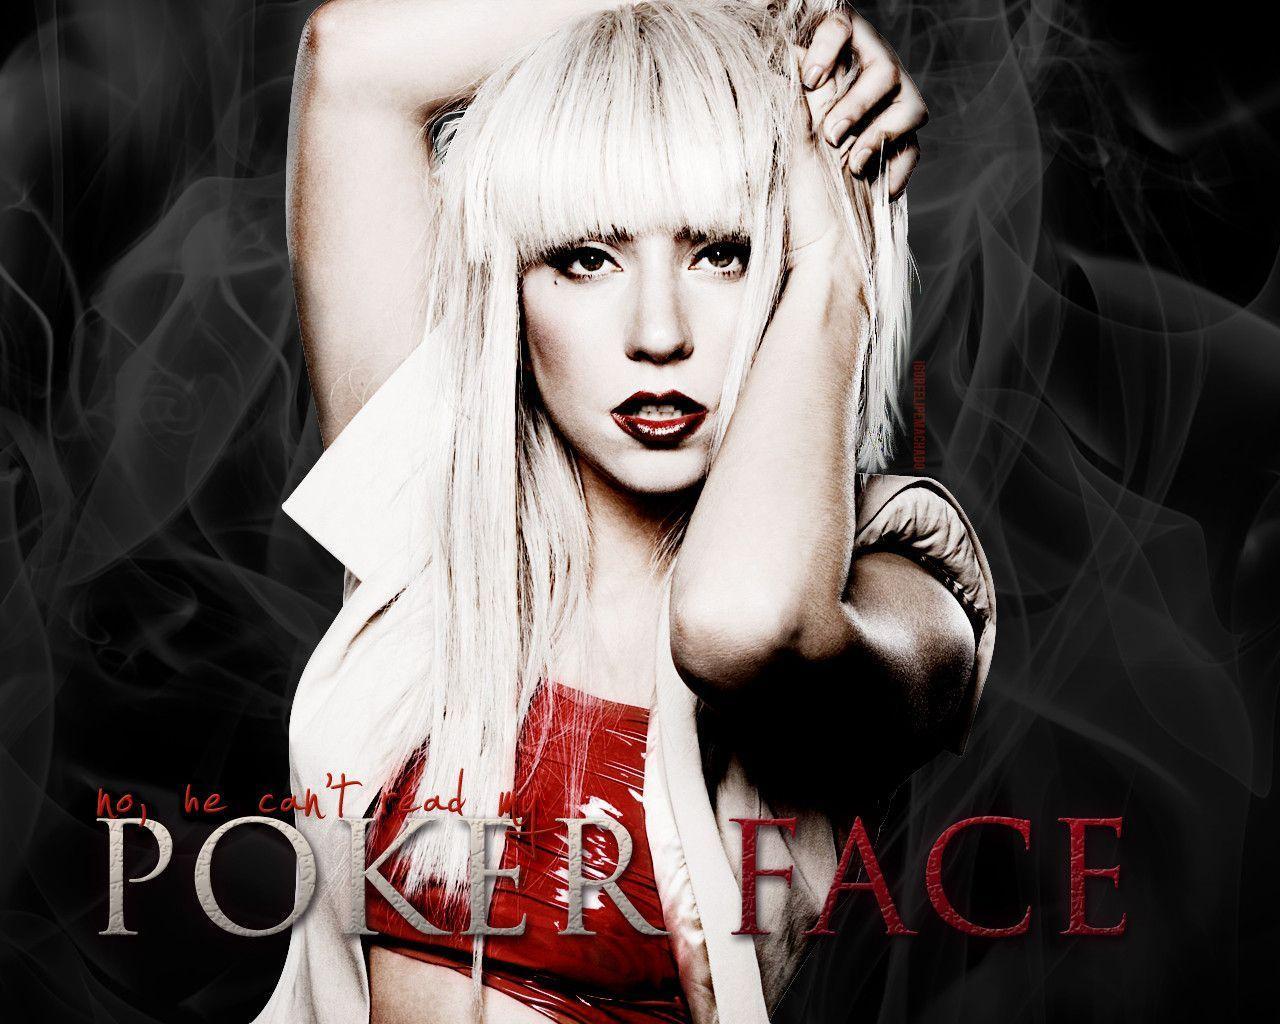 Lady Gaga HD Wallpaper for Desktop, iPhone, iPad, and Android